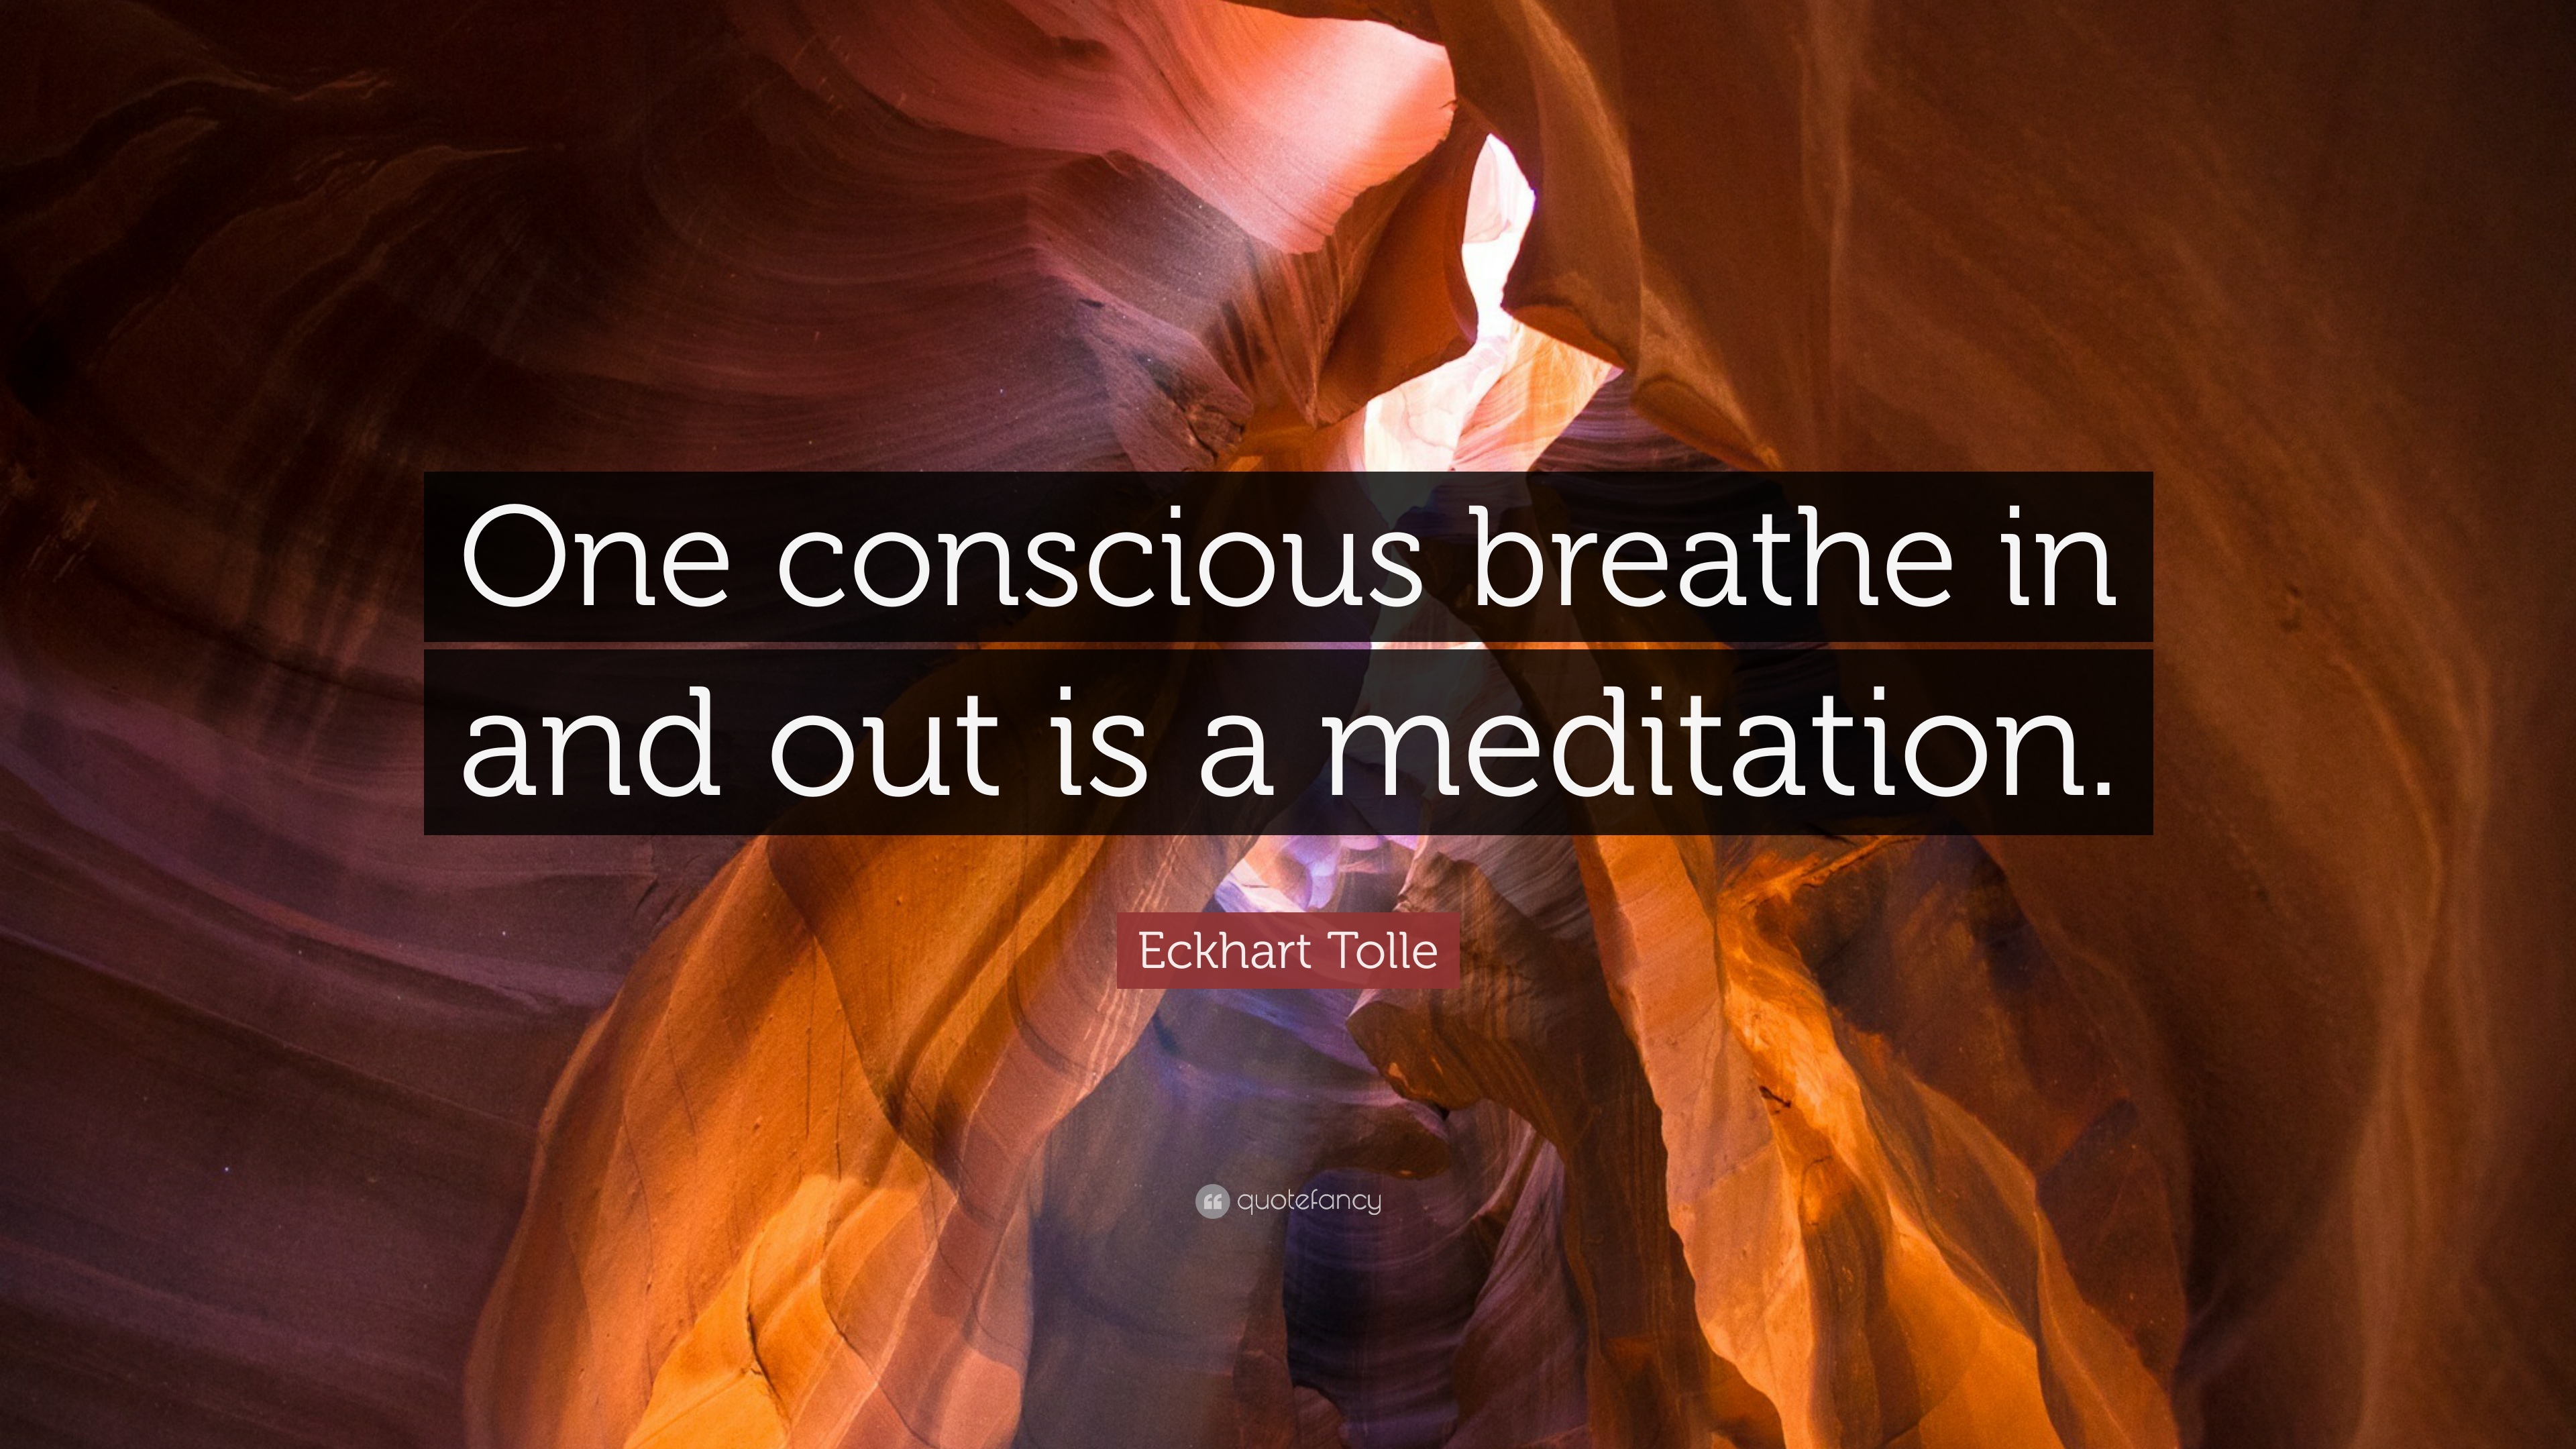 140815-Eckhart-Tolle-Quote-One-conscious-breathe-in-and-out-is-a